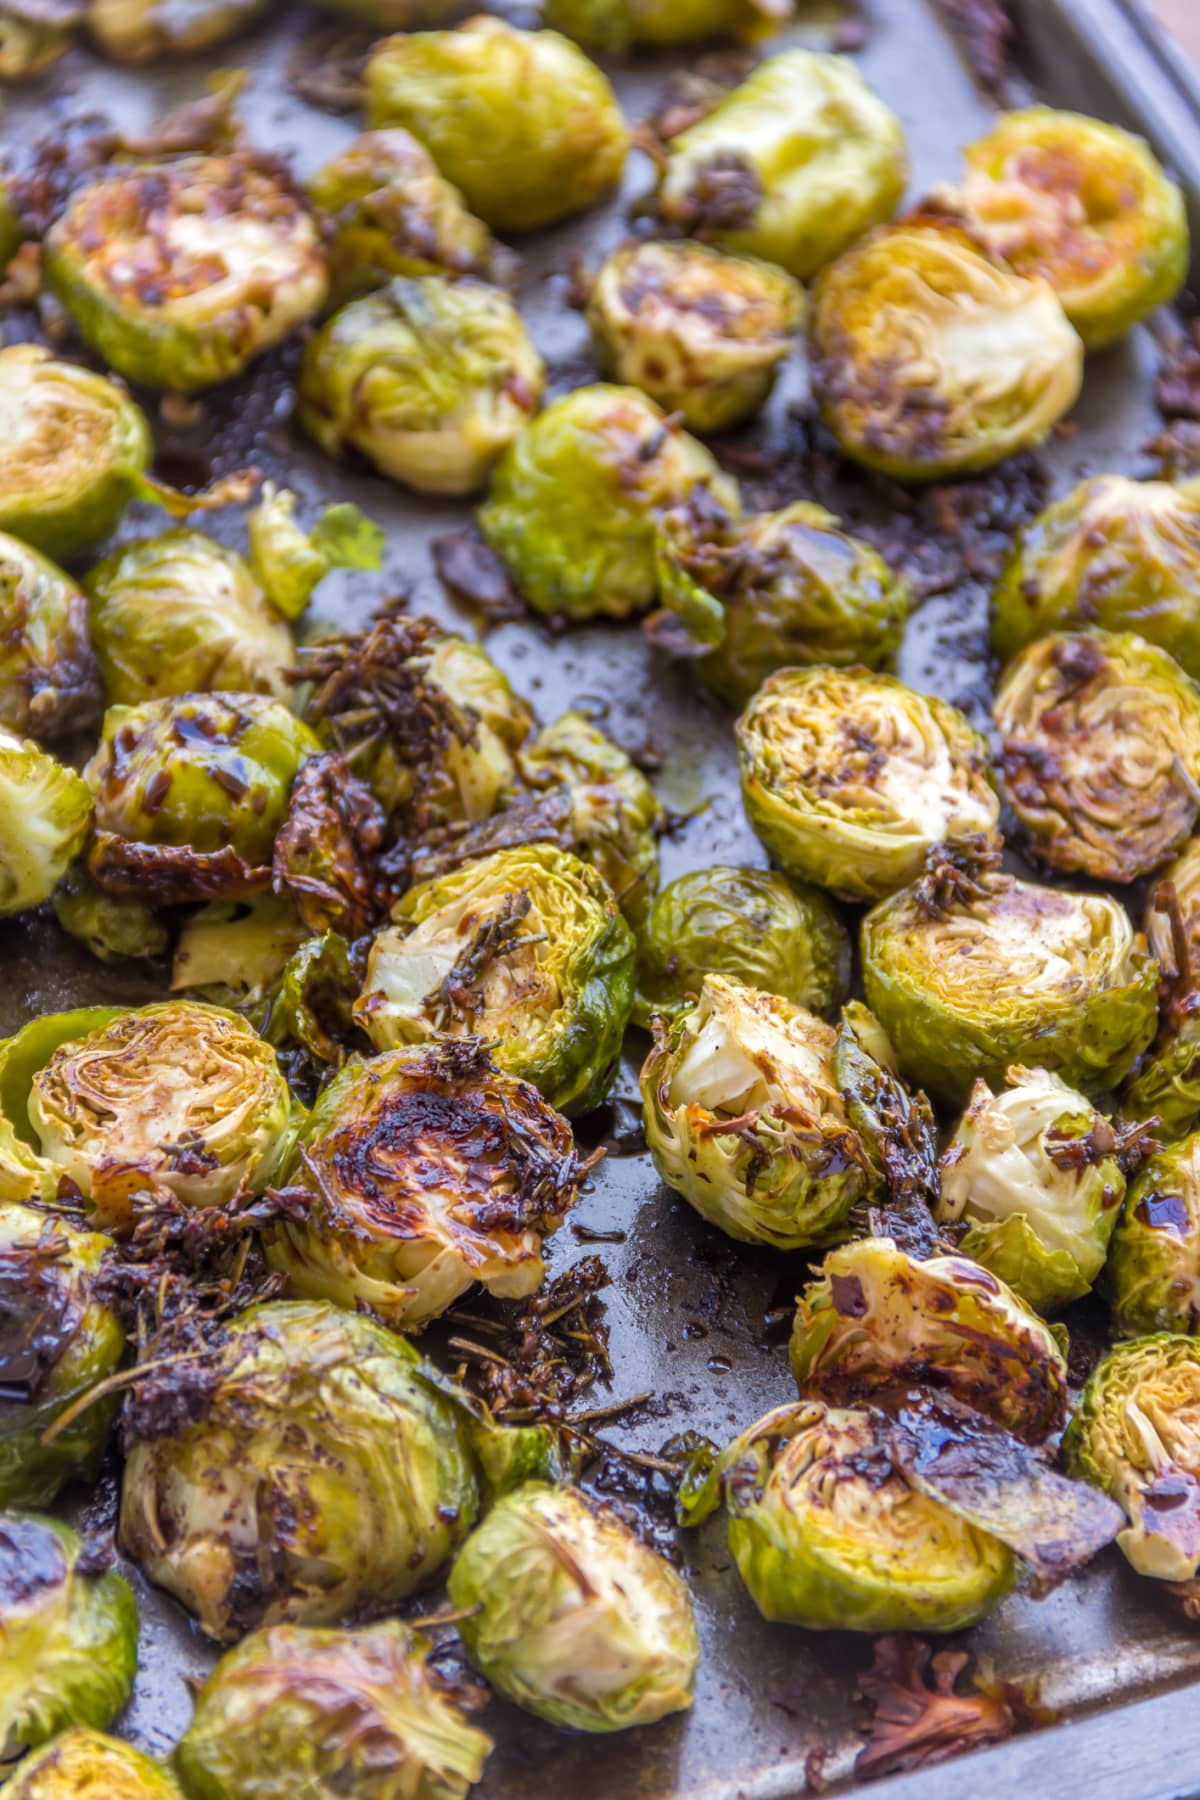 Roasted Brussels Sprouts Mixed with Balsamic Sauce Served in a Baking Tray.